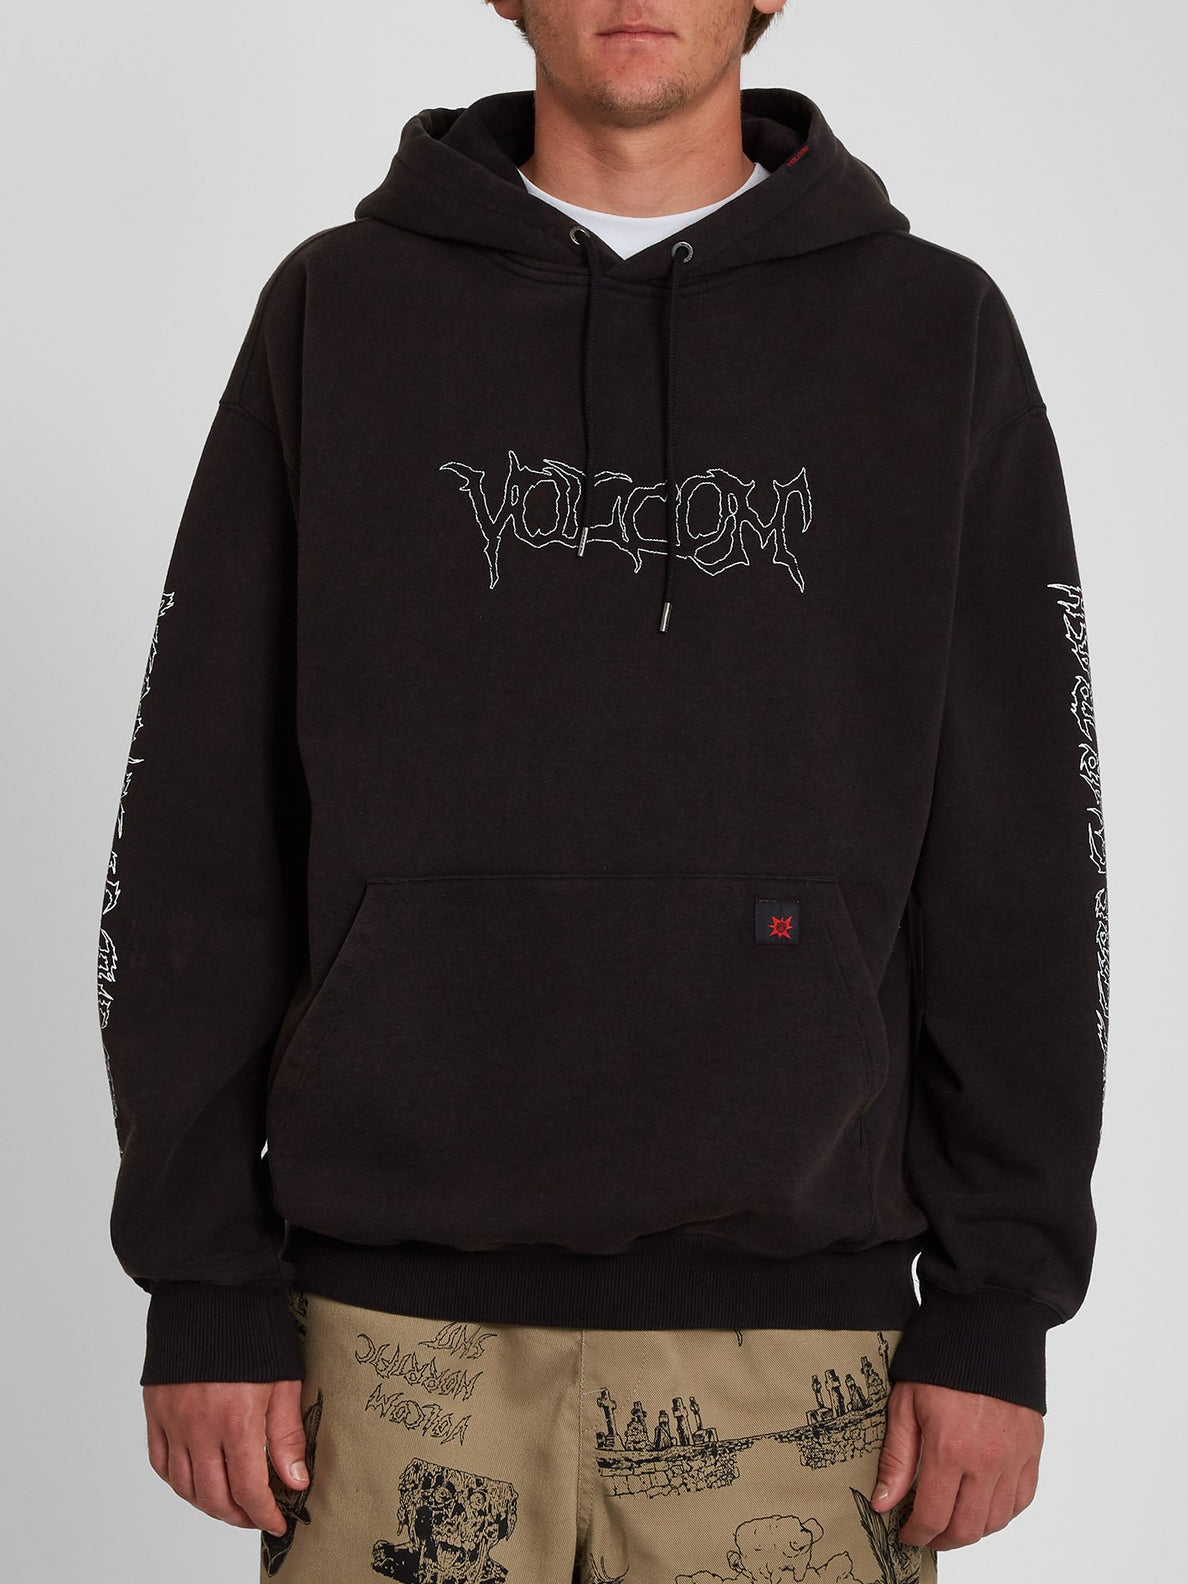 Something Out There Hoodie - BLACK (A4142004_BLK) [F]